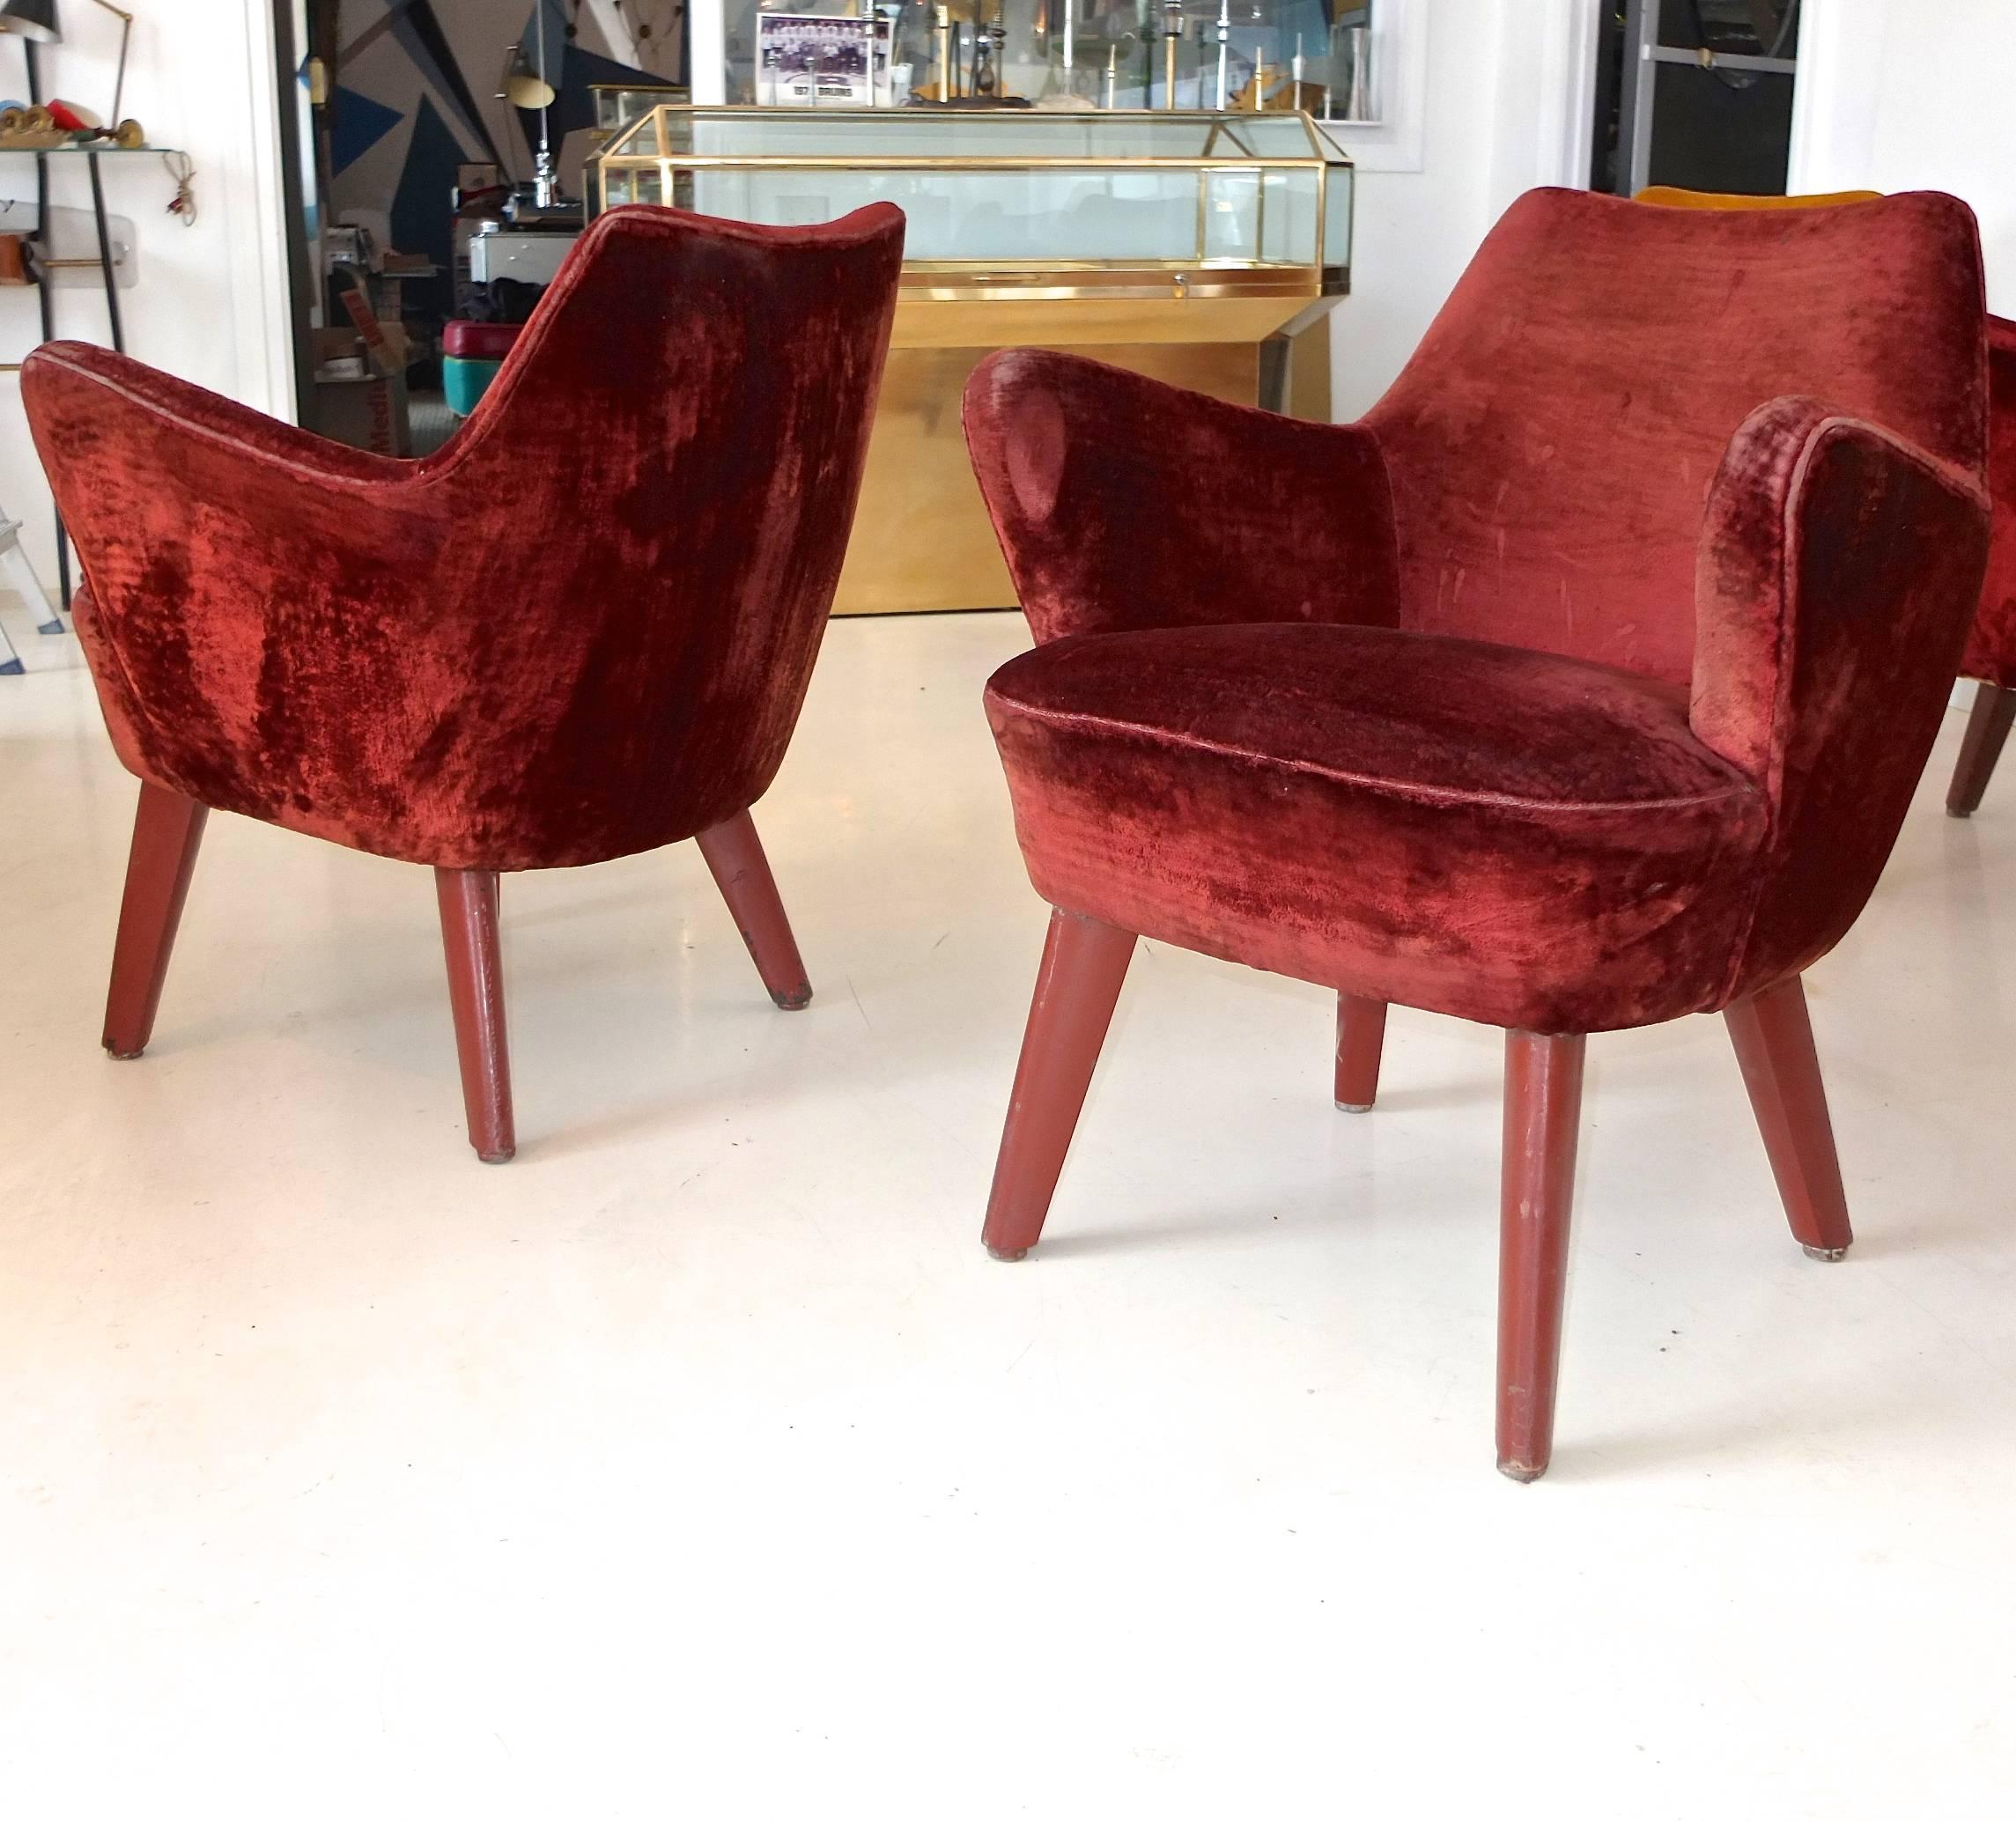 Gio Ponti Chairs from Augustus Ocean Liner - Pairs X3 For Sale 1